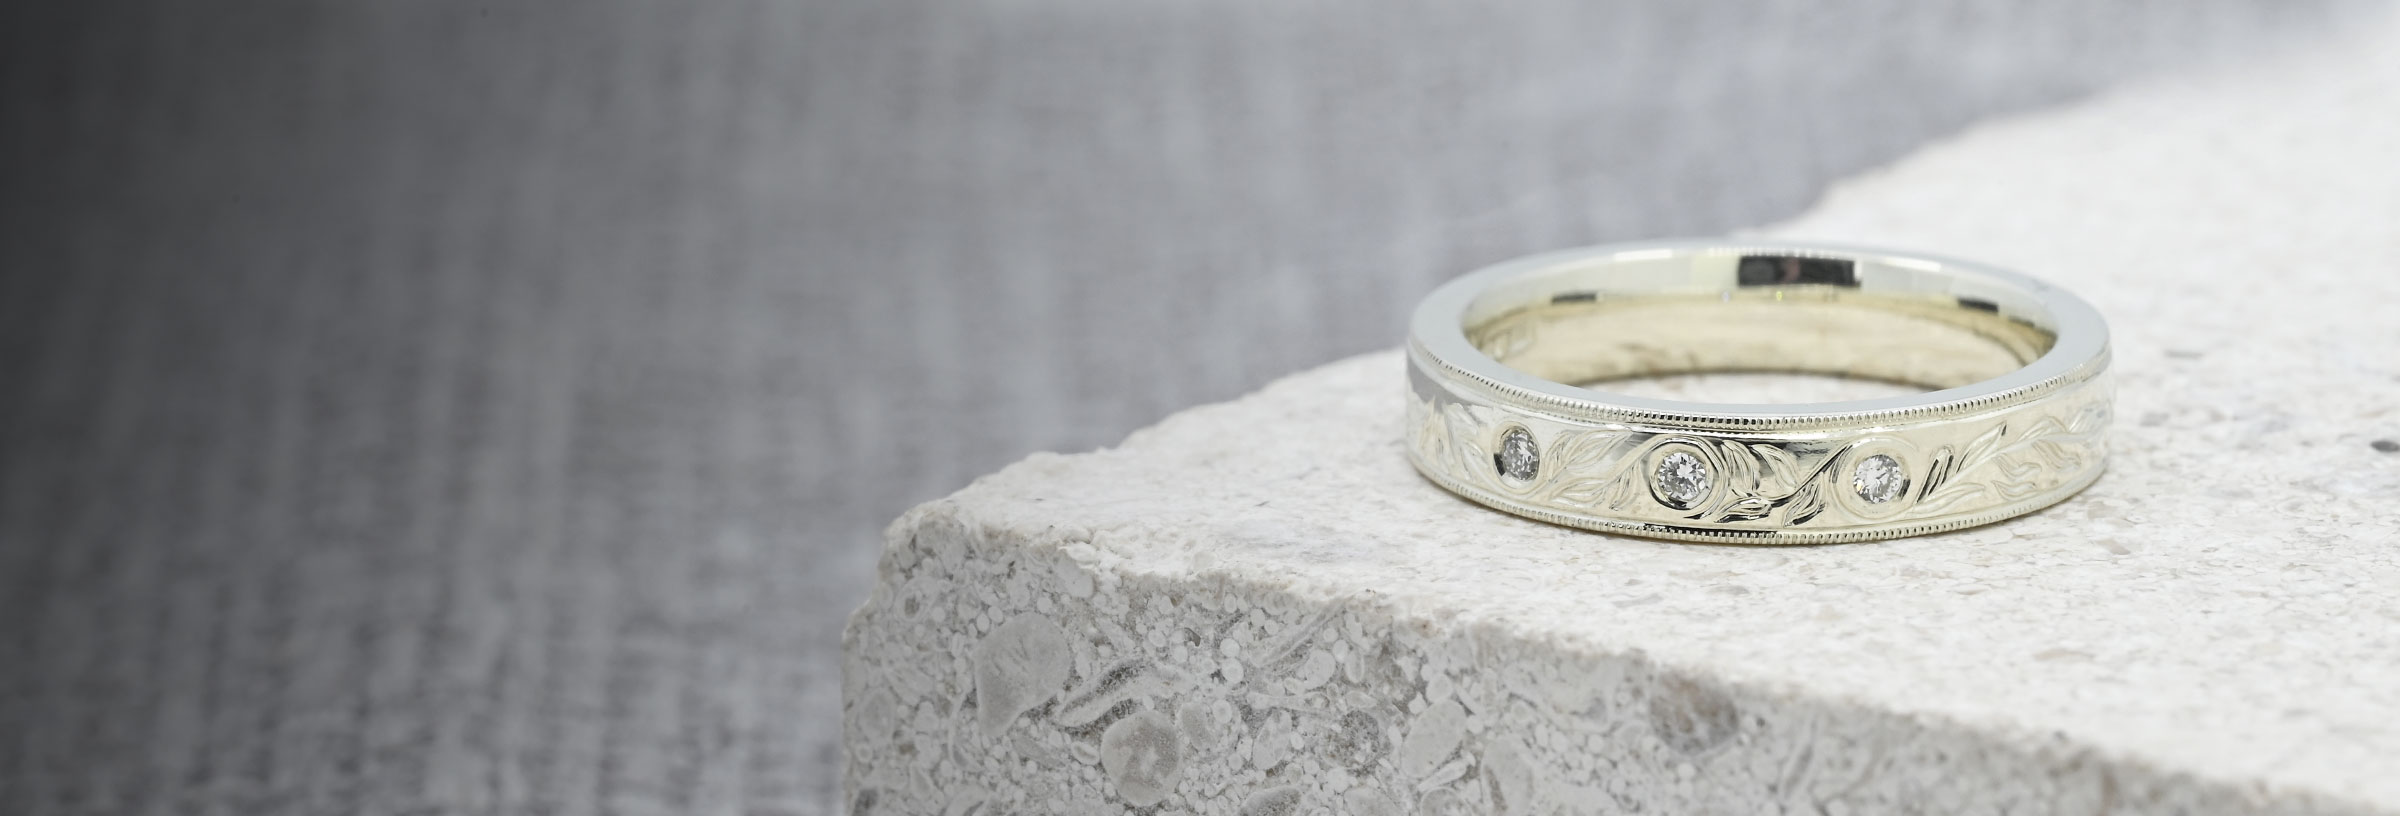 fairtrade-white-gold-eternity-ring-with-diamonds-and-olive-leaf-engraving